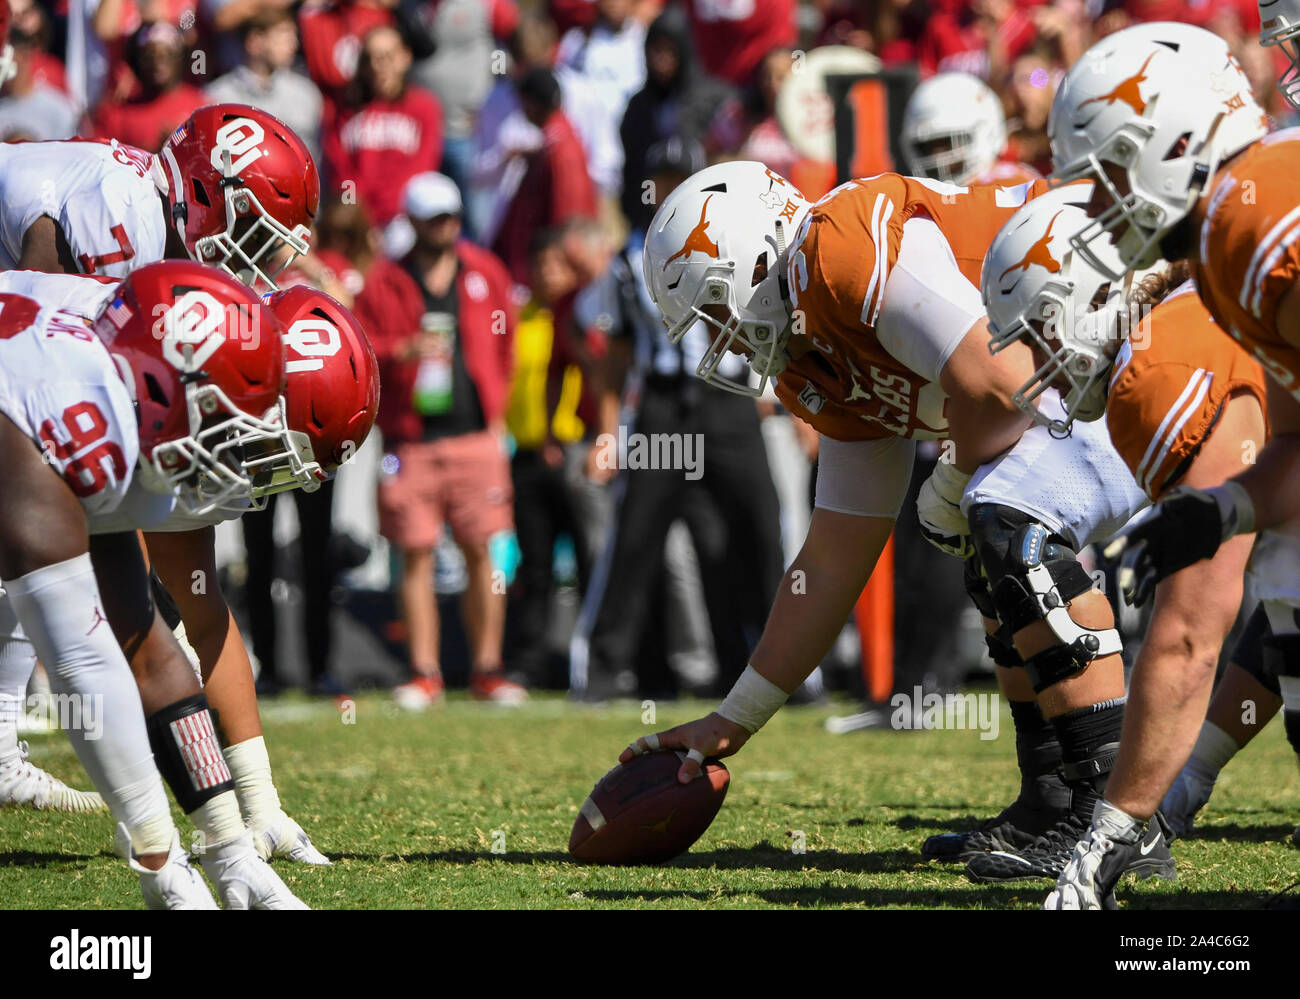 Oct 12, 2019: Texas Longhorns center Zach Shackelford #56 prepares to snap the ball during the NCAA Red River Rivalry game between the University of Oklahoma Sooners and the University of Texas Longhorns at the Cotton Bowl Stadium at Fair Park in Dallas, TX Oklahoma defeated 34-27 Albert Pena/CSM Stock Photo